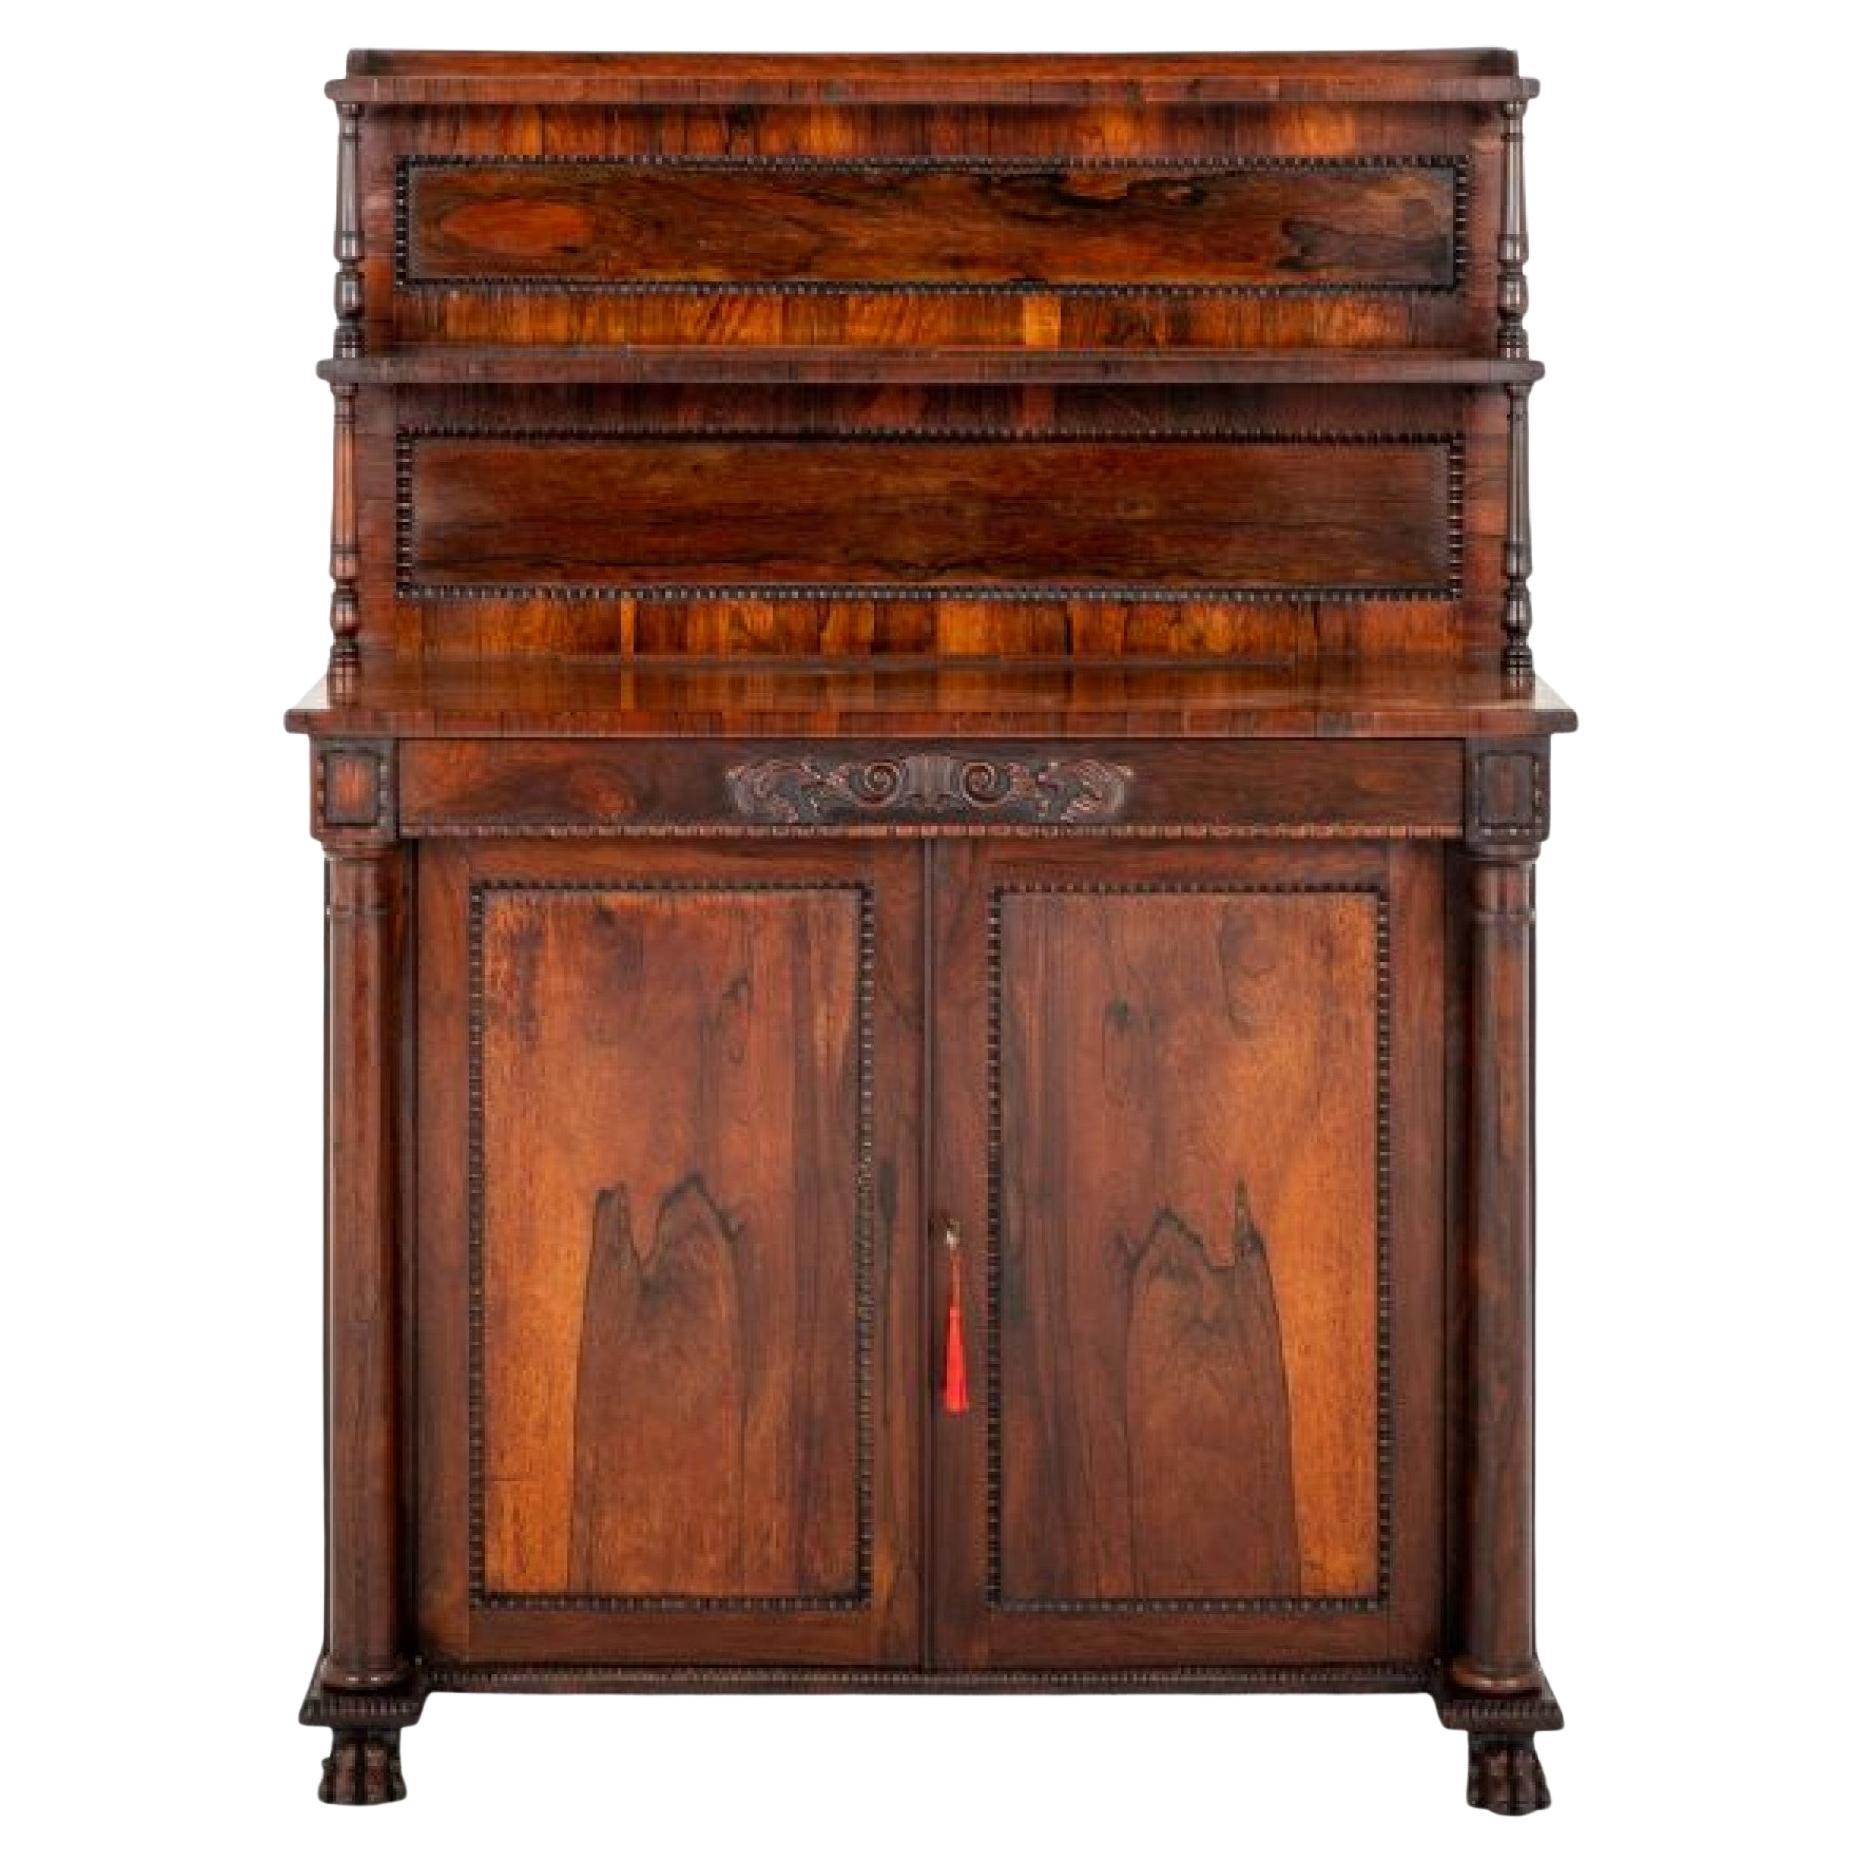 Regency Chiffonier Sideboard Chest Period Antiques For Sale